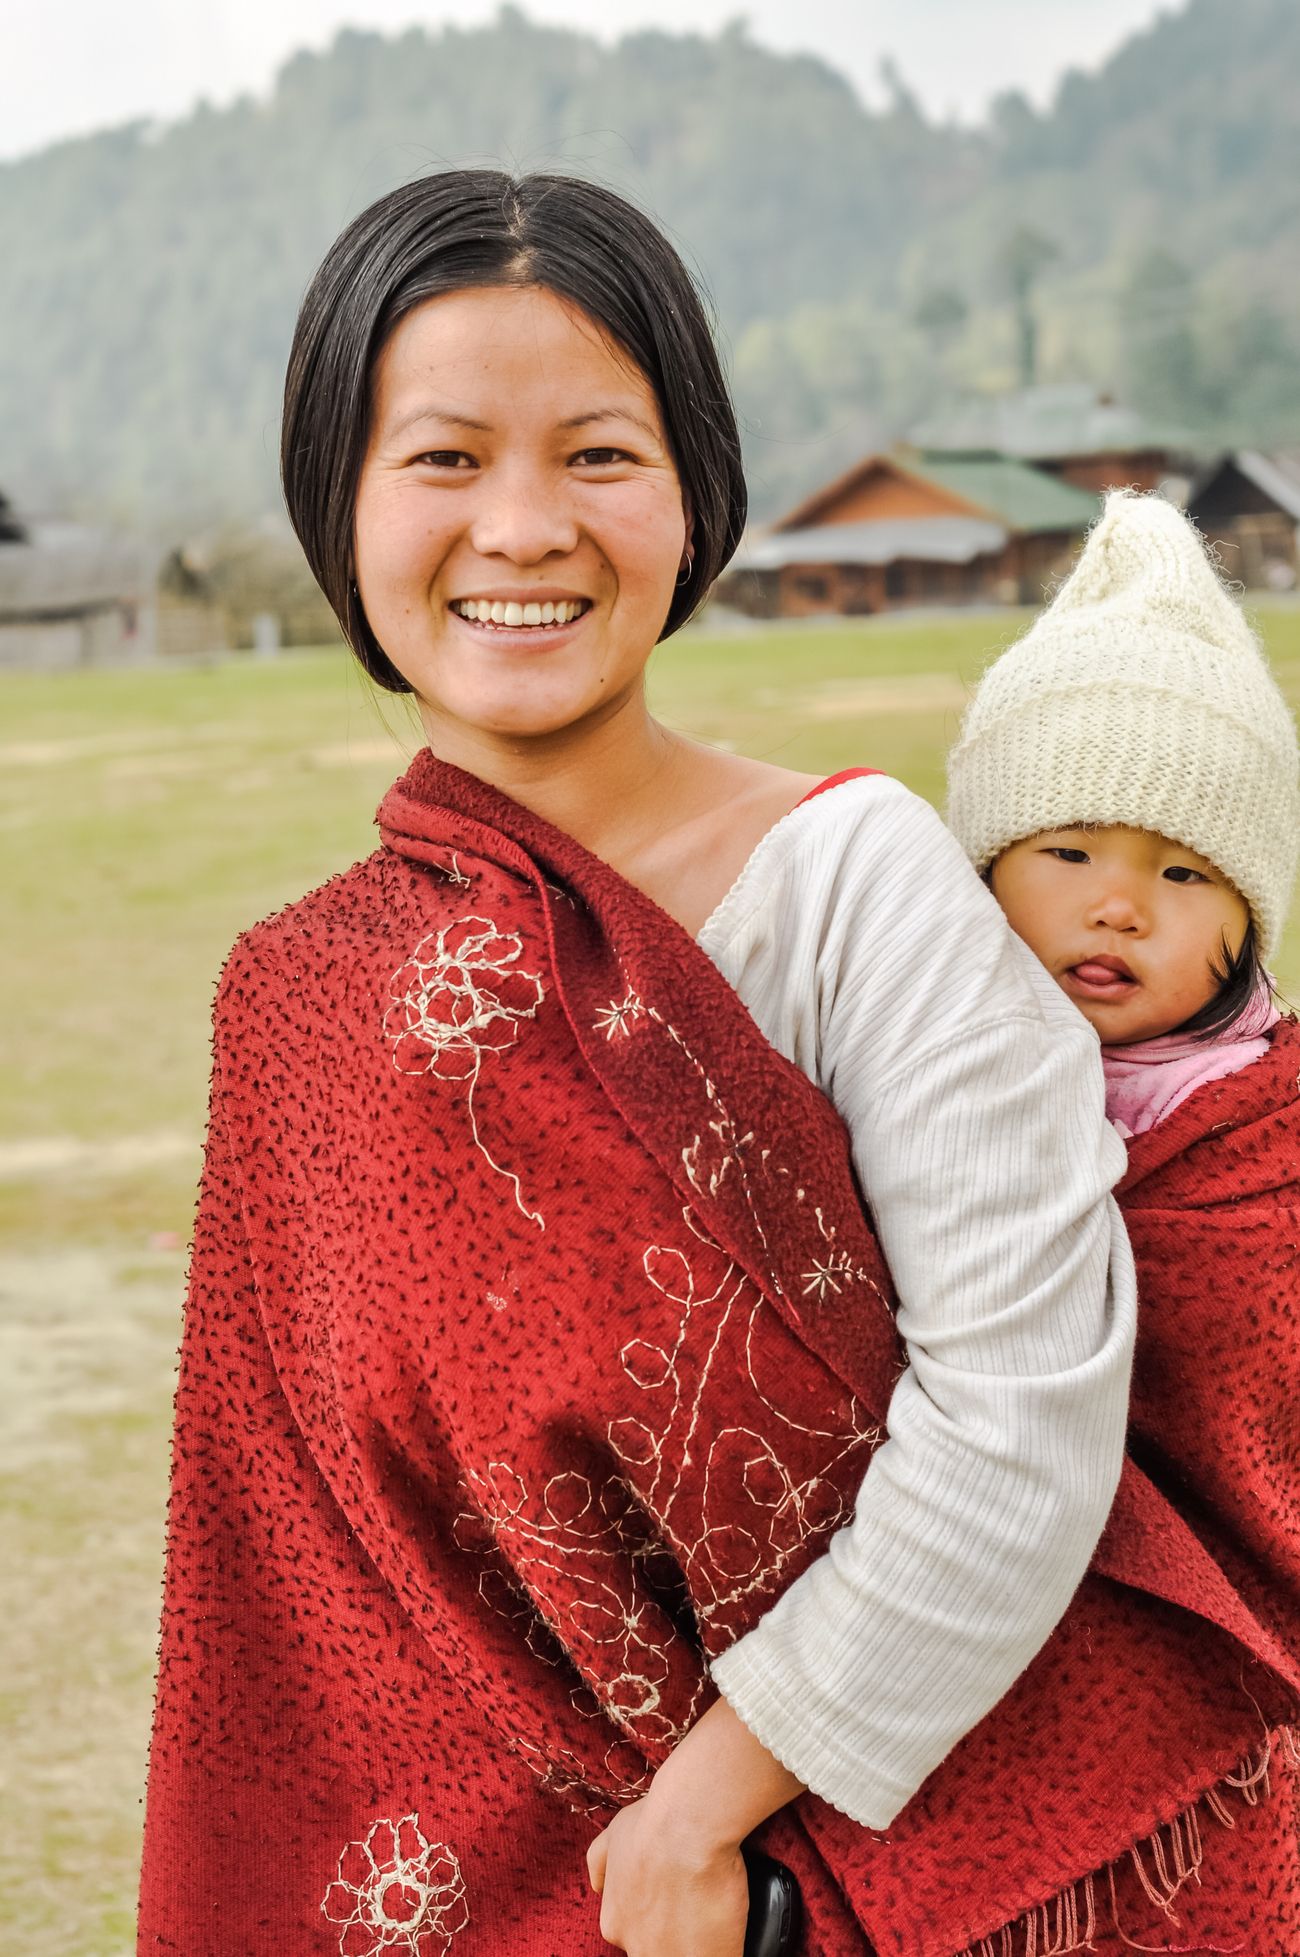 The Apatani in Ziro women are said to be blessed with beauty which is quite evident from the picture of a young woman in a white t-shirt and red scarf carrying her daughter on her back at Ziro, Arunachal Pradesh